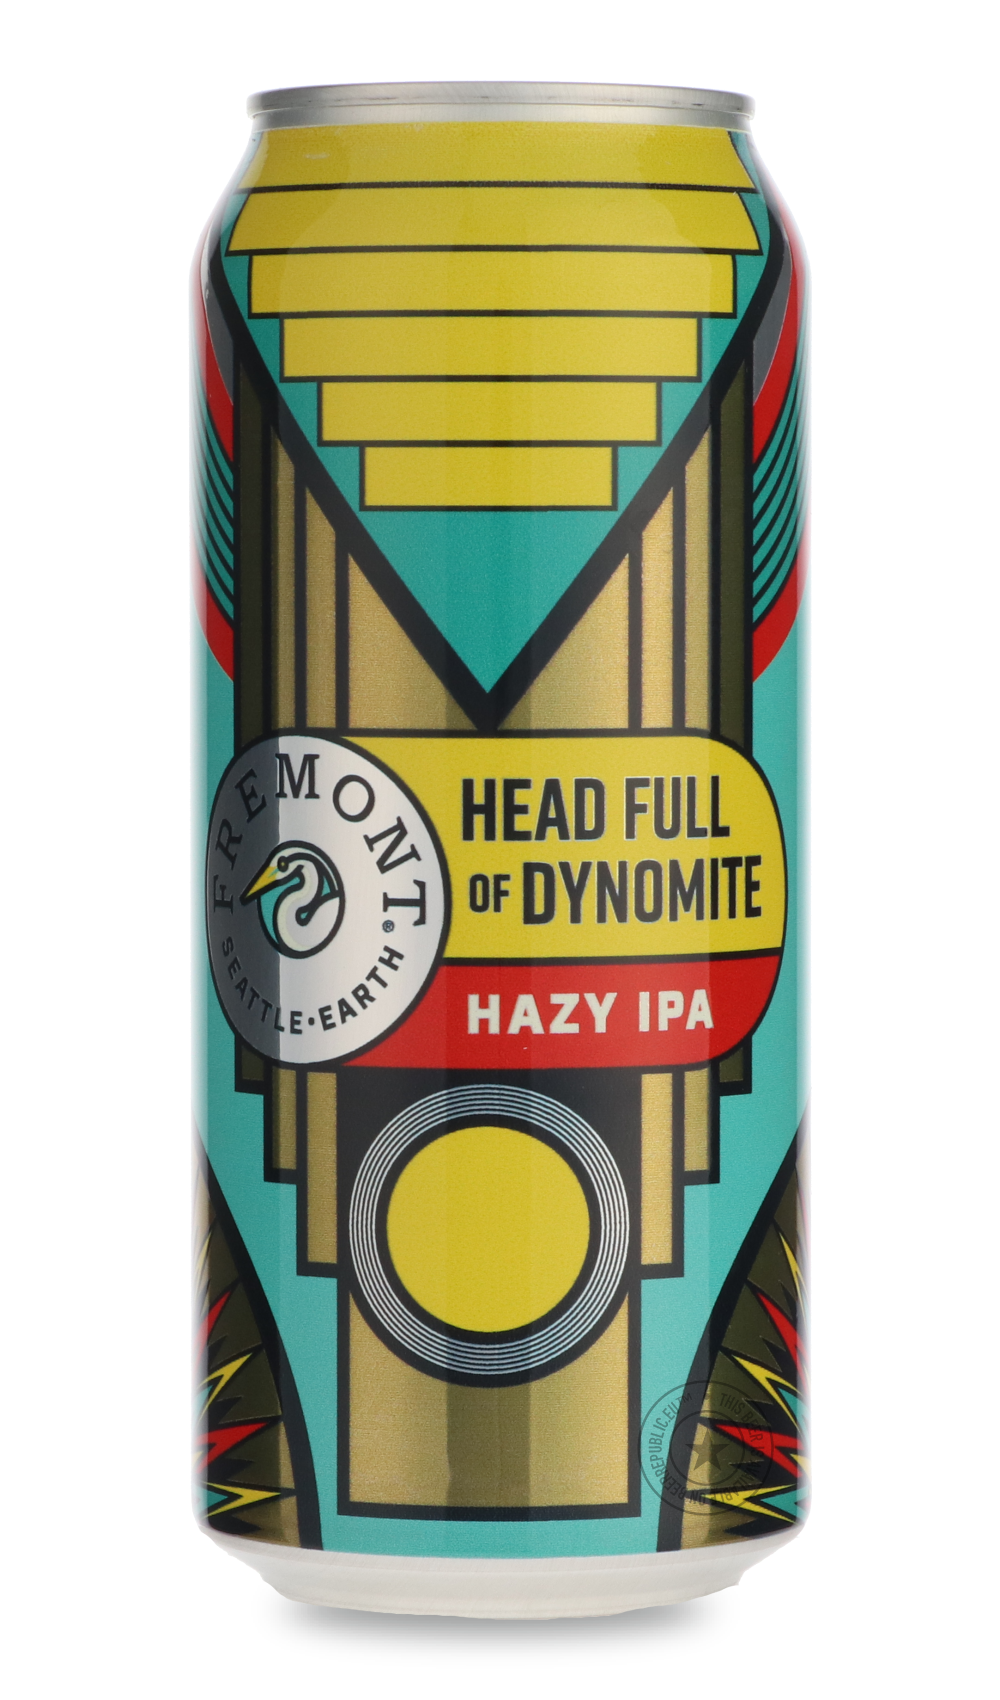 -Fremont- Head Full of Dynomite v.48-IPA- Only @ Beer Republic - The best online beer store for American & Canadian craft beer - Buy beer online from the USA and Canada - Bier online kopen - Amerikaans bier kopen - Craft beer store - Craft beer kopen - Amerikanisch bier kaufen - Bier online kaufen - Acheter biere online - IPA - Stout - Porter - New England IPA - Hazy IPA - Imperial Stout - Barrel Aged - Barrel Aged Imperial Stout - Brown - Dark beer - Blond - Blonde - Pilsner - Lager - Wheat - Weizen - Ambe